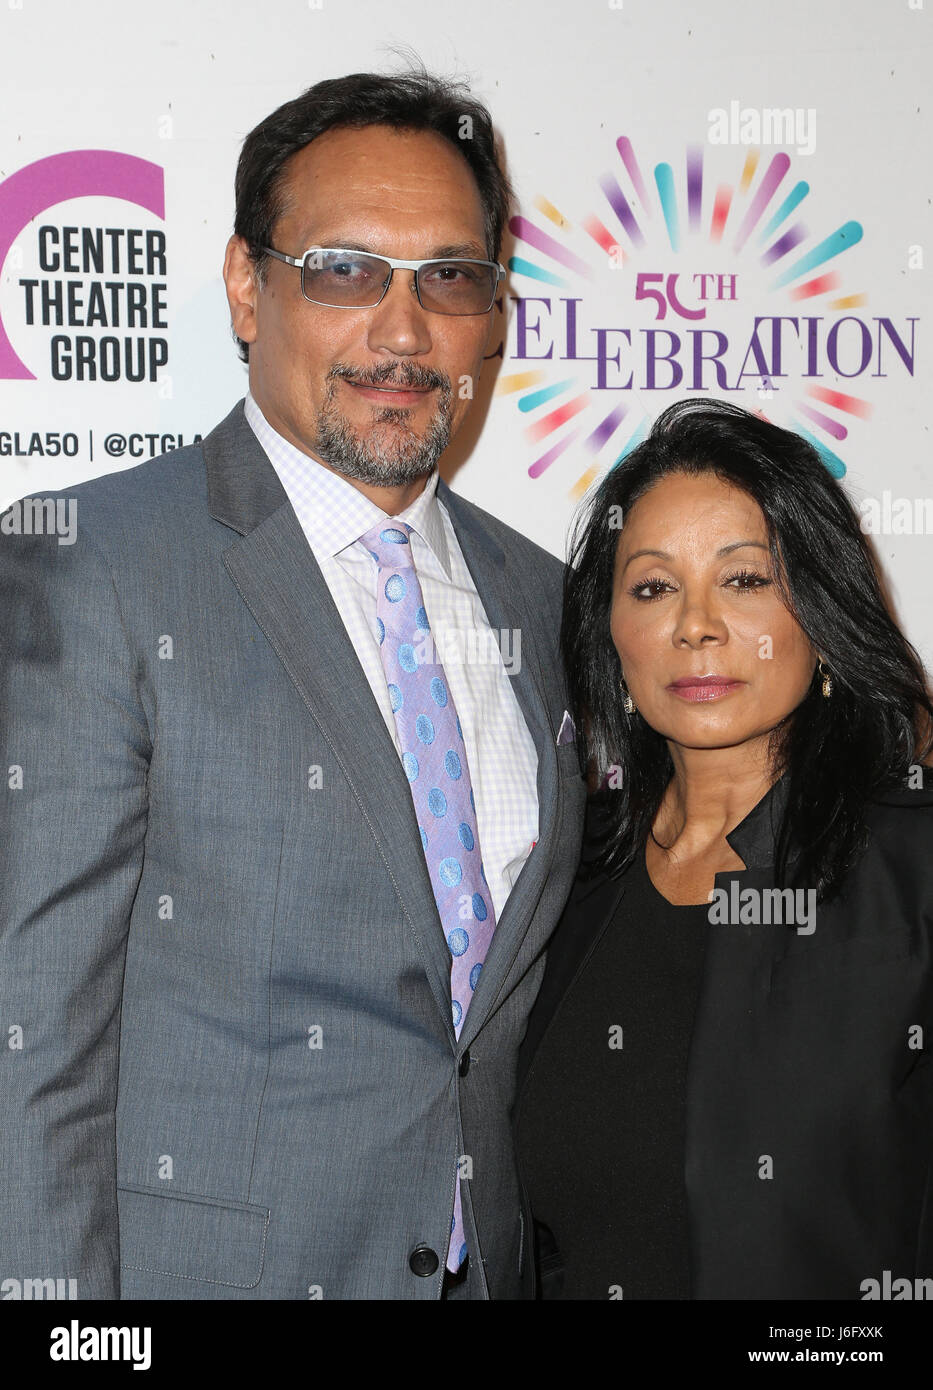 Los Angeles, Ca, USA. 20th May, 2017. Jimmy Smits, Wanda De Jesus, At Center Theatre Group's 50th Anniversary Celebration At Ahmanson Theatre In California on May 20, 2017. Credit: Fs/Media Punch/Alamy Live News Stock Photo